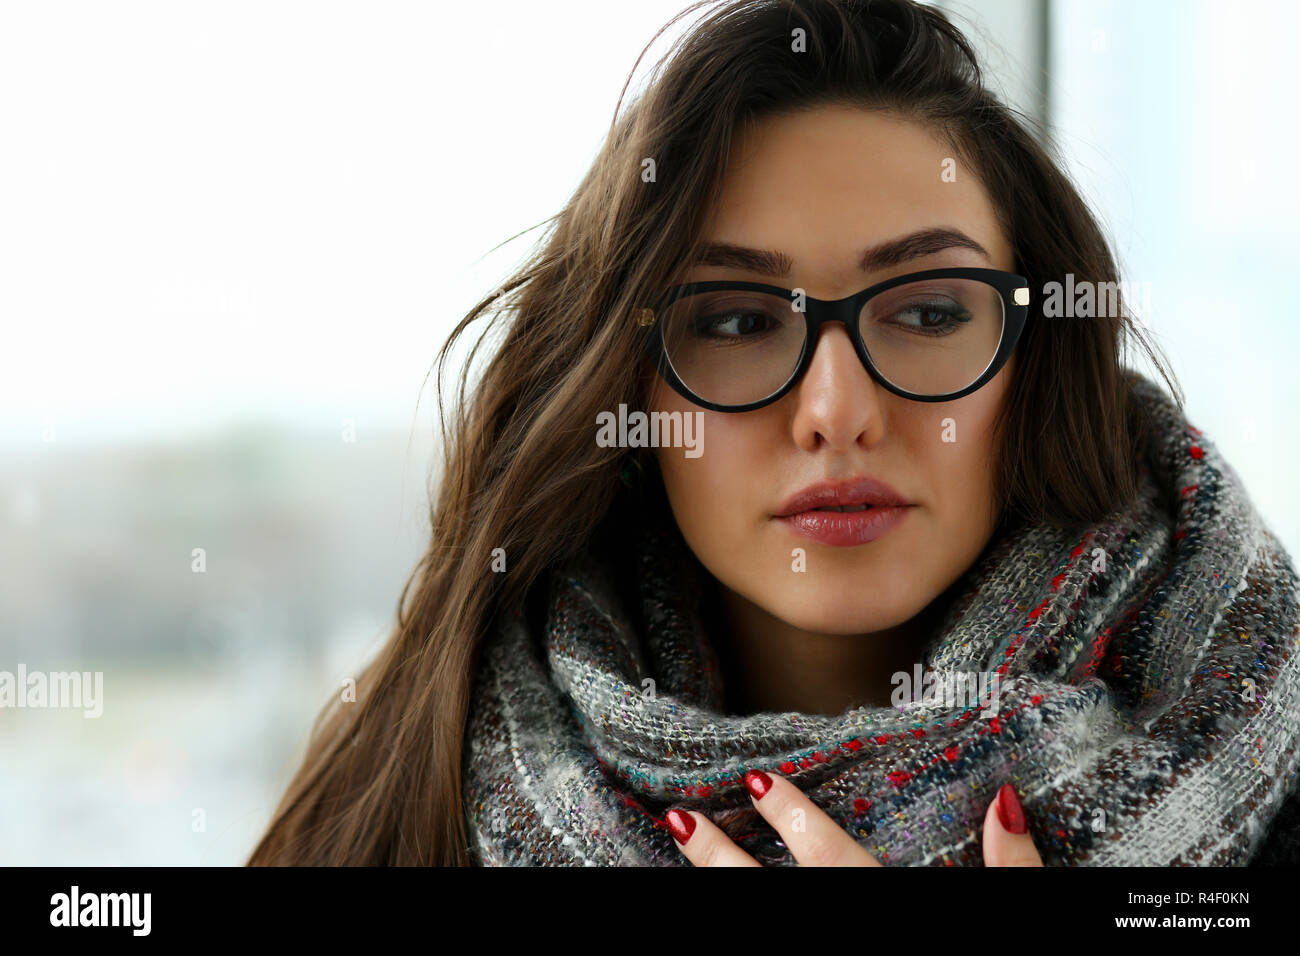 Young beautiful woman in a scarf portrait is Stock Photo